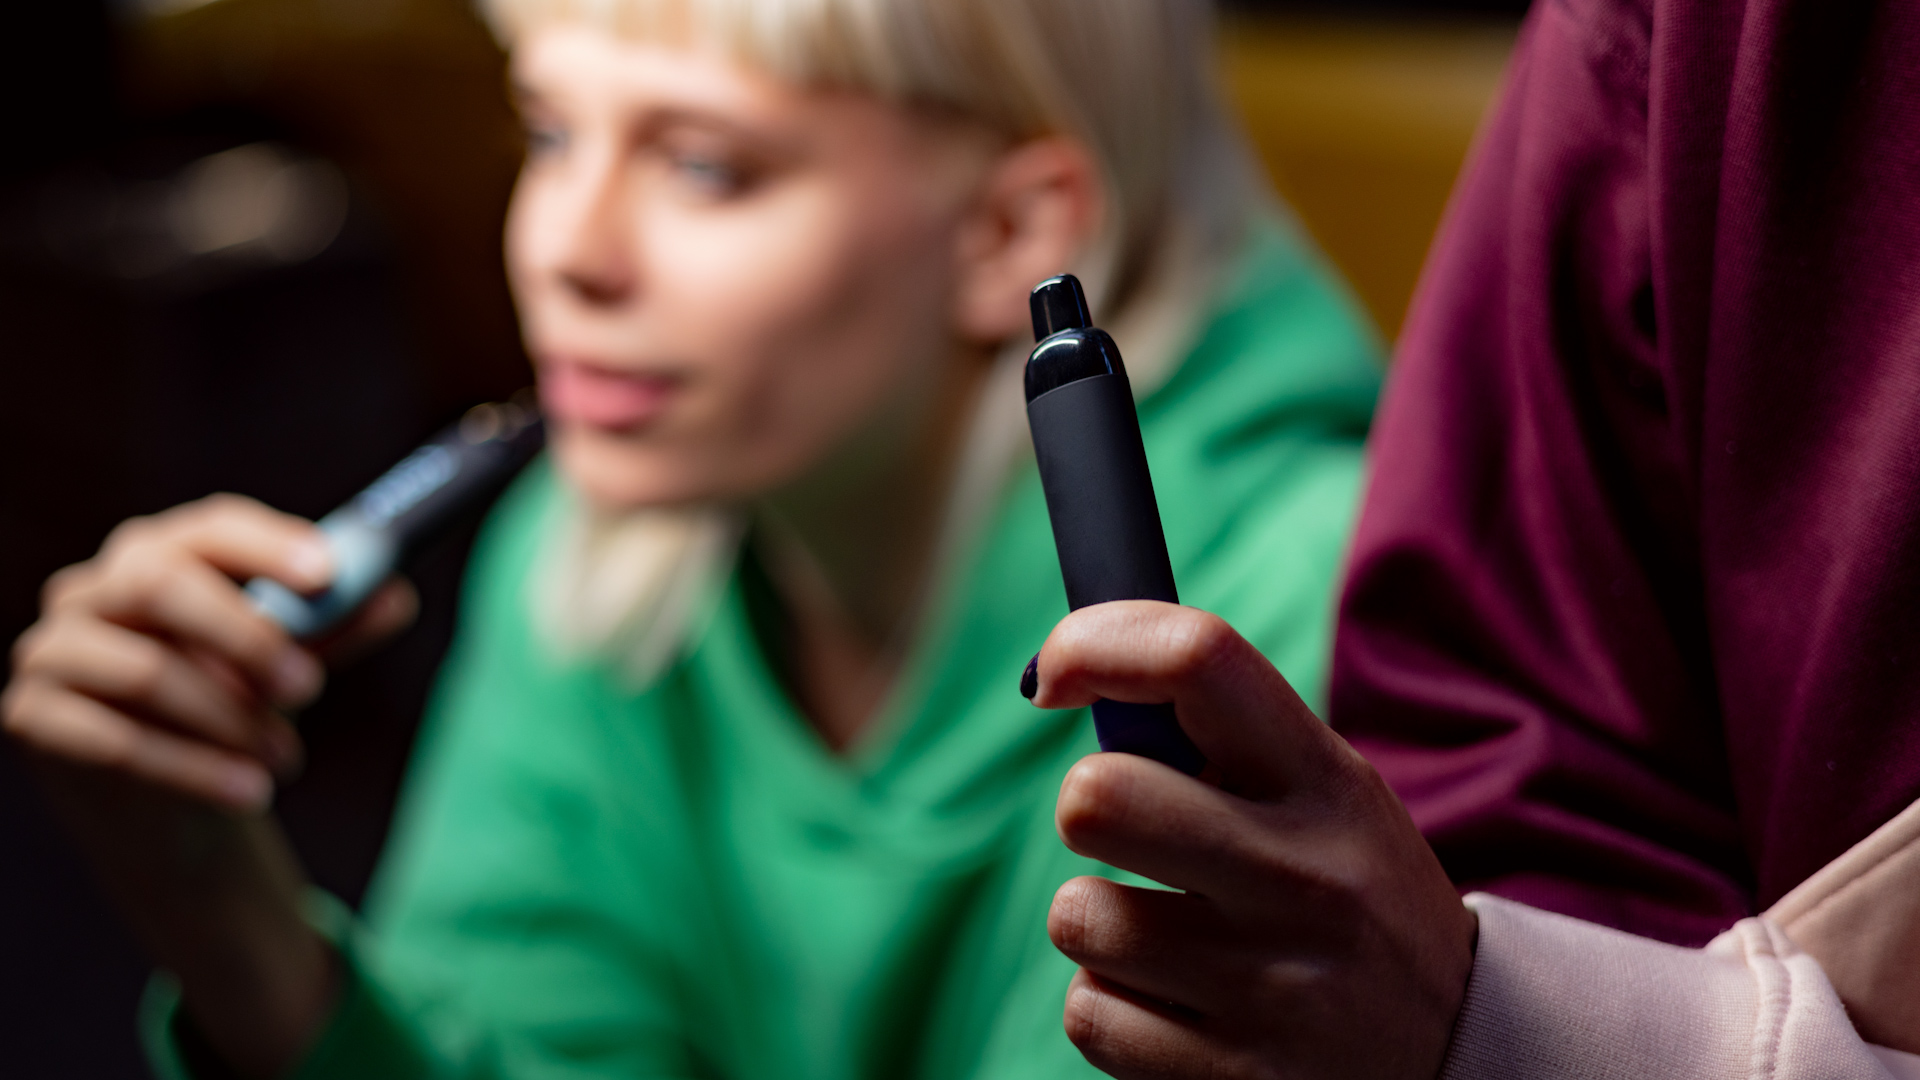 The U.K. government plans to ban disposable vape sales to curb youth vaping, contributing to the country's goal of being smoke-free by 2030.